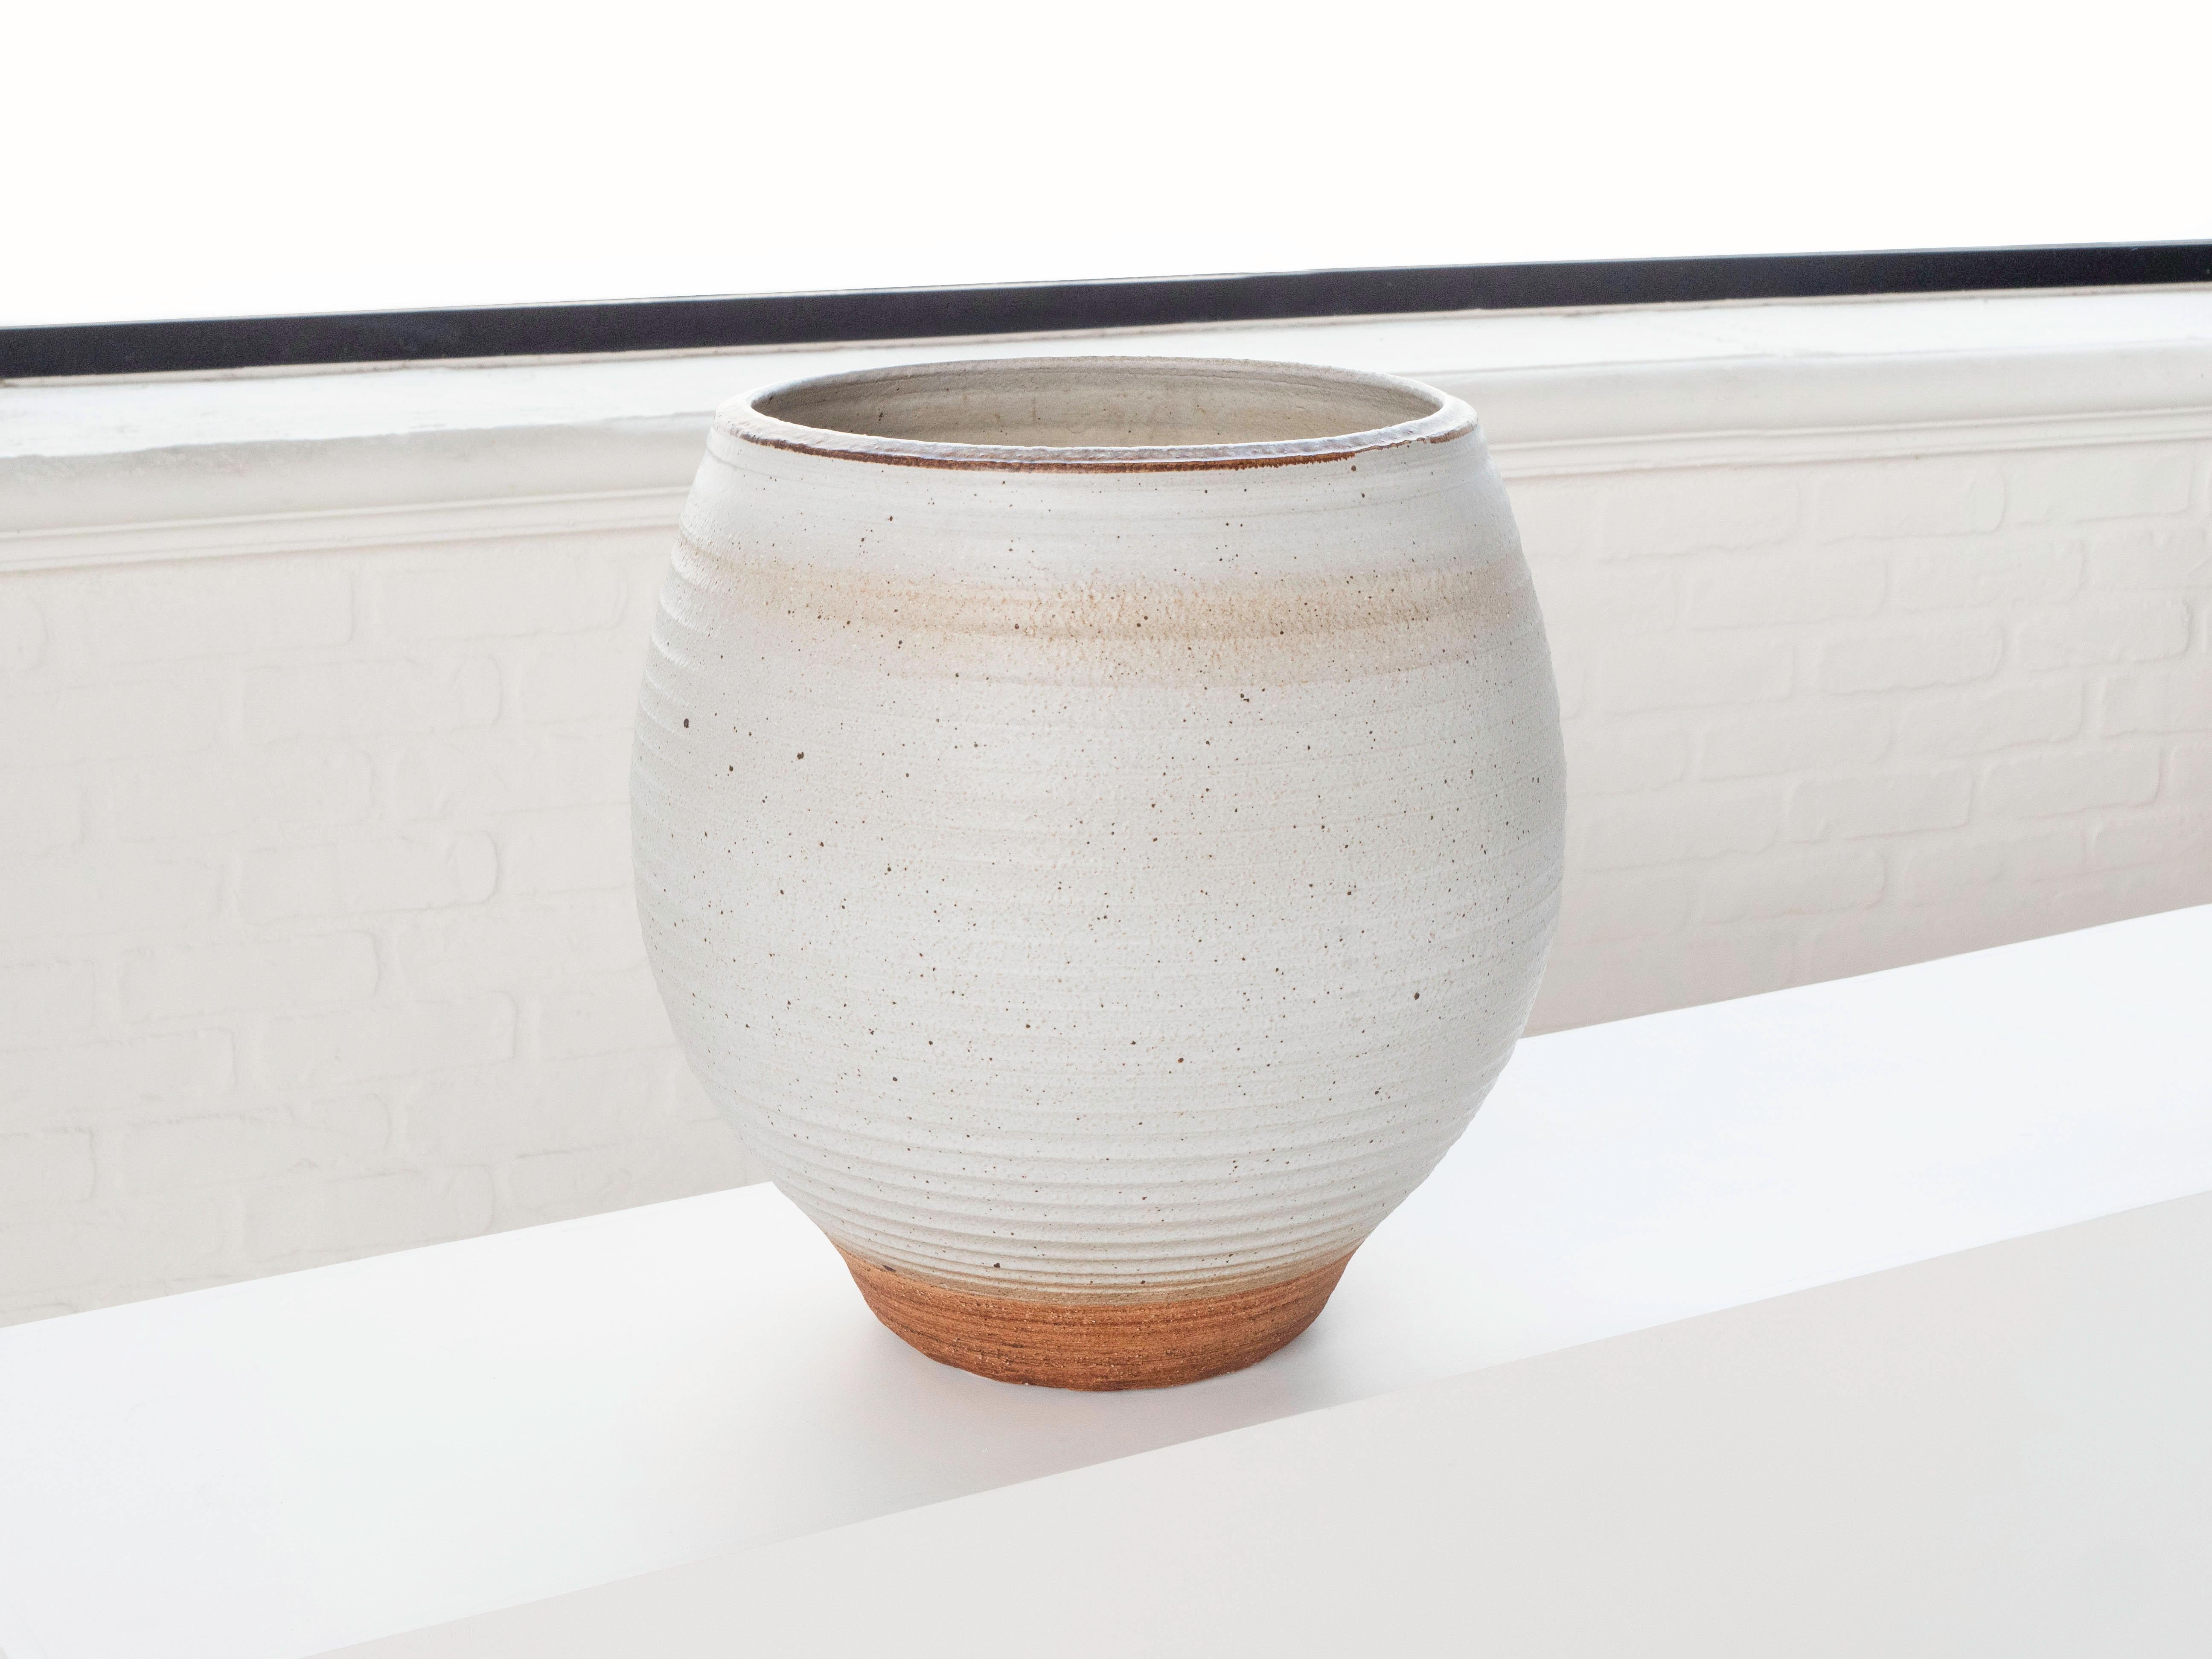 A large hand thrown planter by ceramist Bob Kinzie for his company Affiliated Craftsmen, California 1960's. The upper portion of the piece has a white tone glaze with espresso colored specks while the bottom portion shows exposed stoneware. The